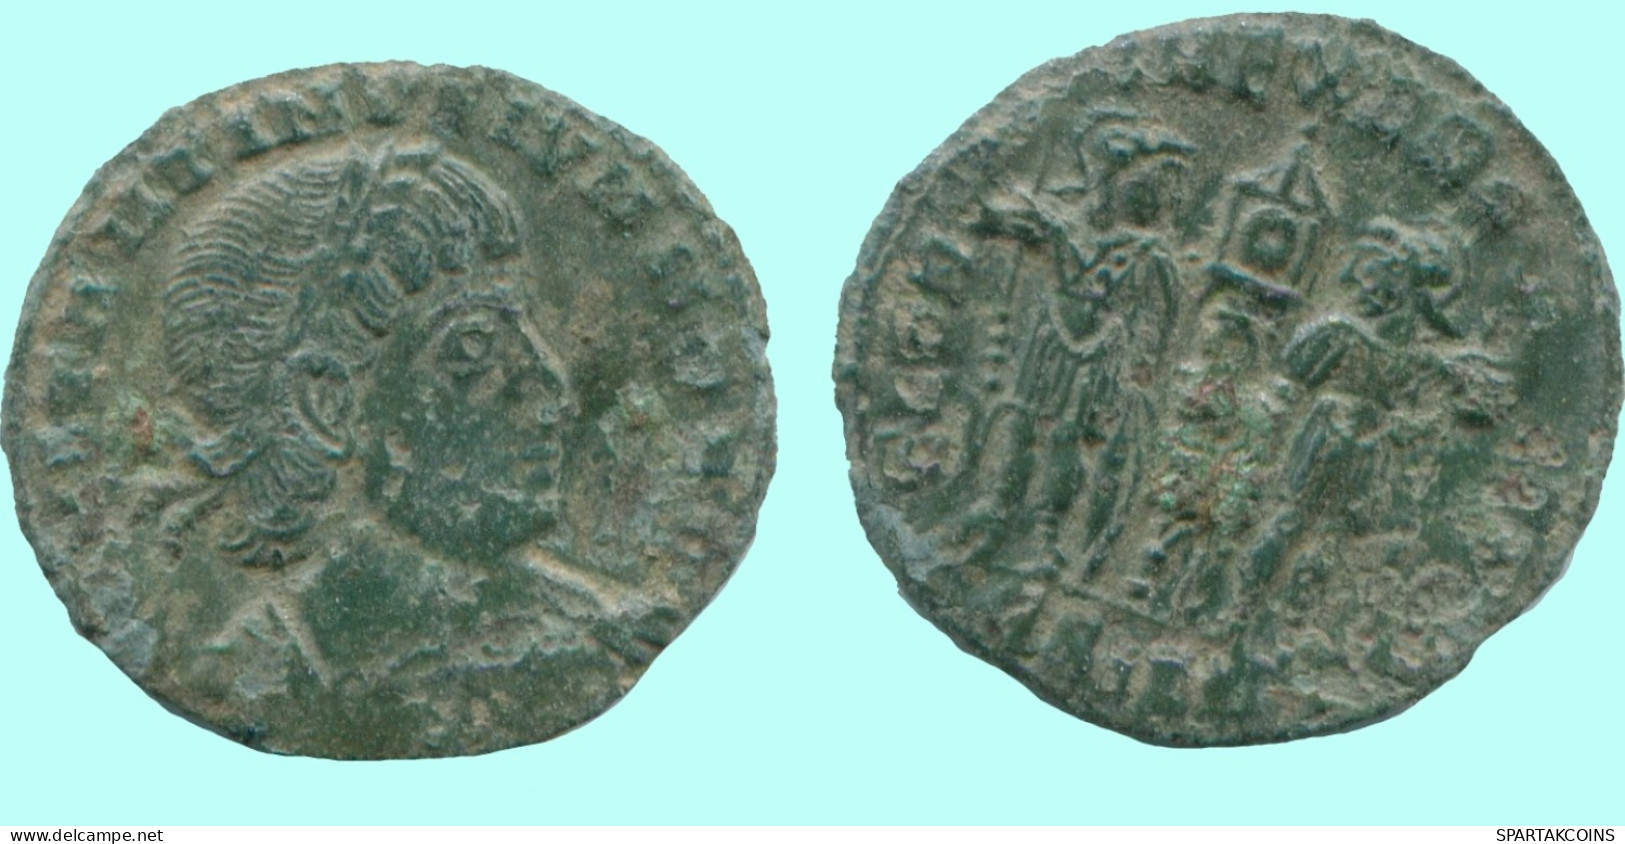 CONSTANTINUS TWO SOLDIERS GLORIA EXERCITVS 1.1g/16mm #ANC13092.17.D.A - The Christian Empire (307 AD To 363 AD)